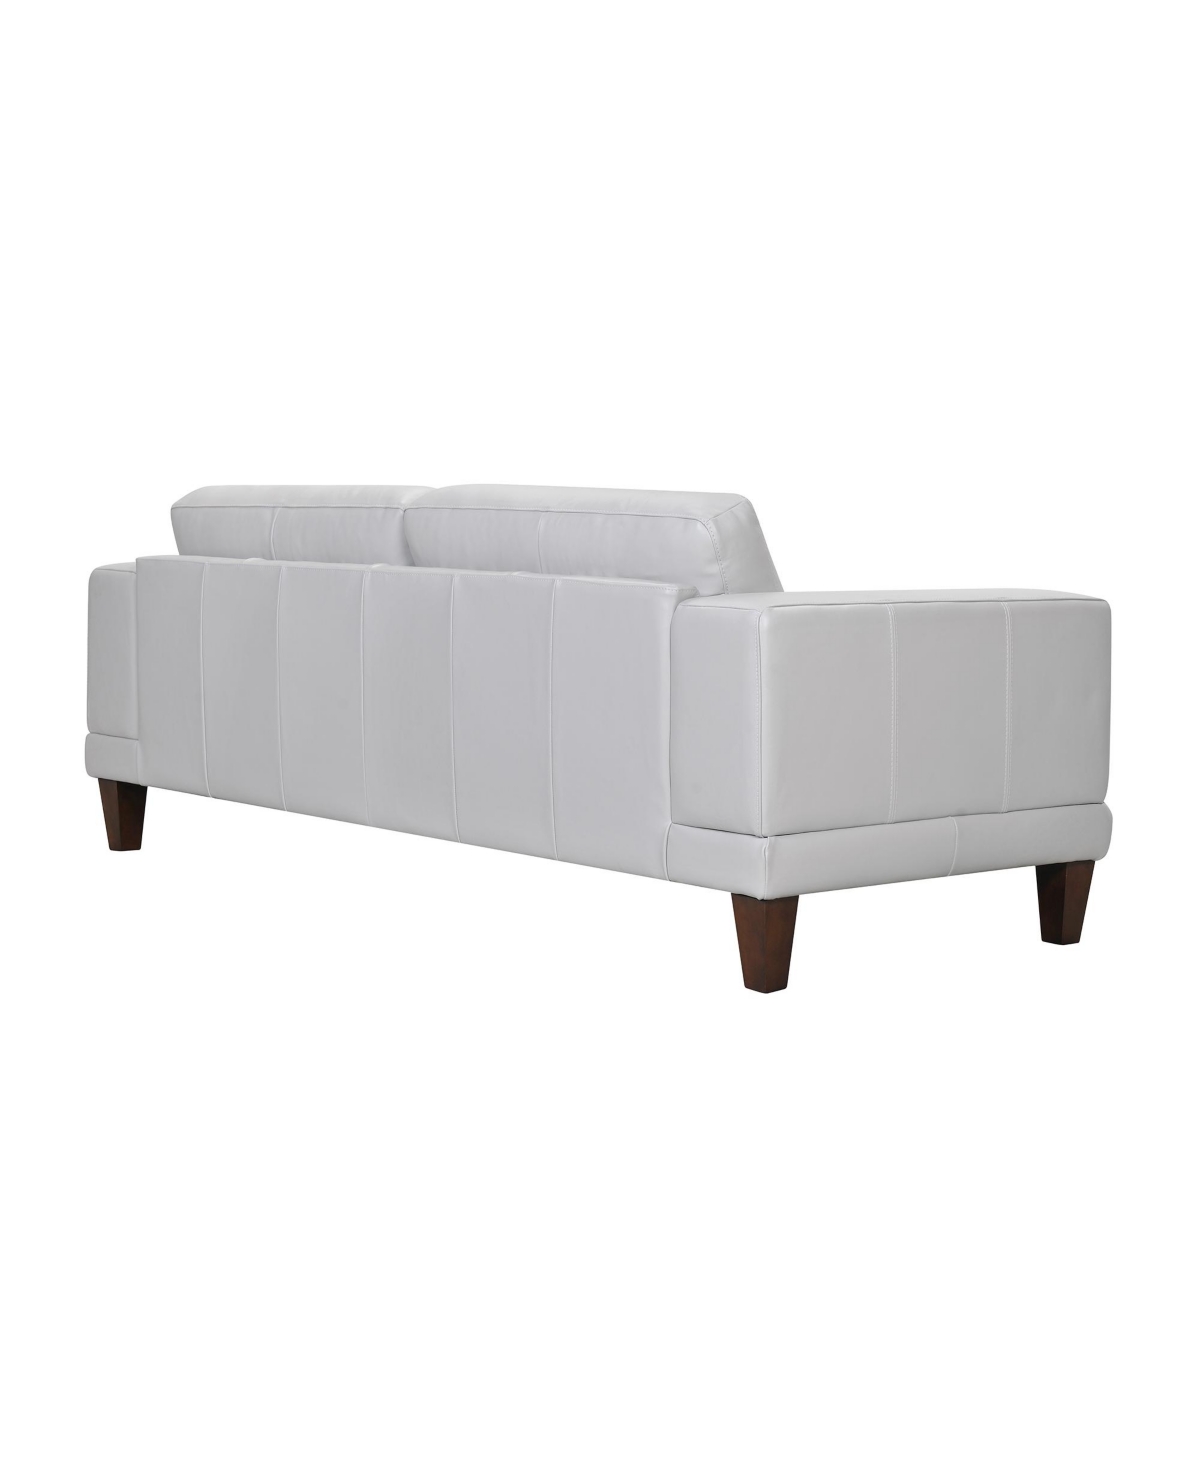 Shop Armen Living Wynne 94" Genuine Leather With Wood Legs In Contemporary Sofa In Dove Gray